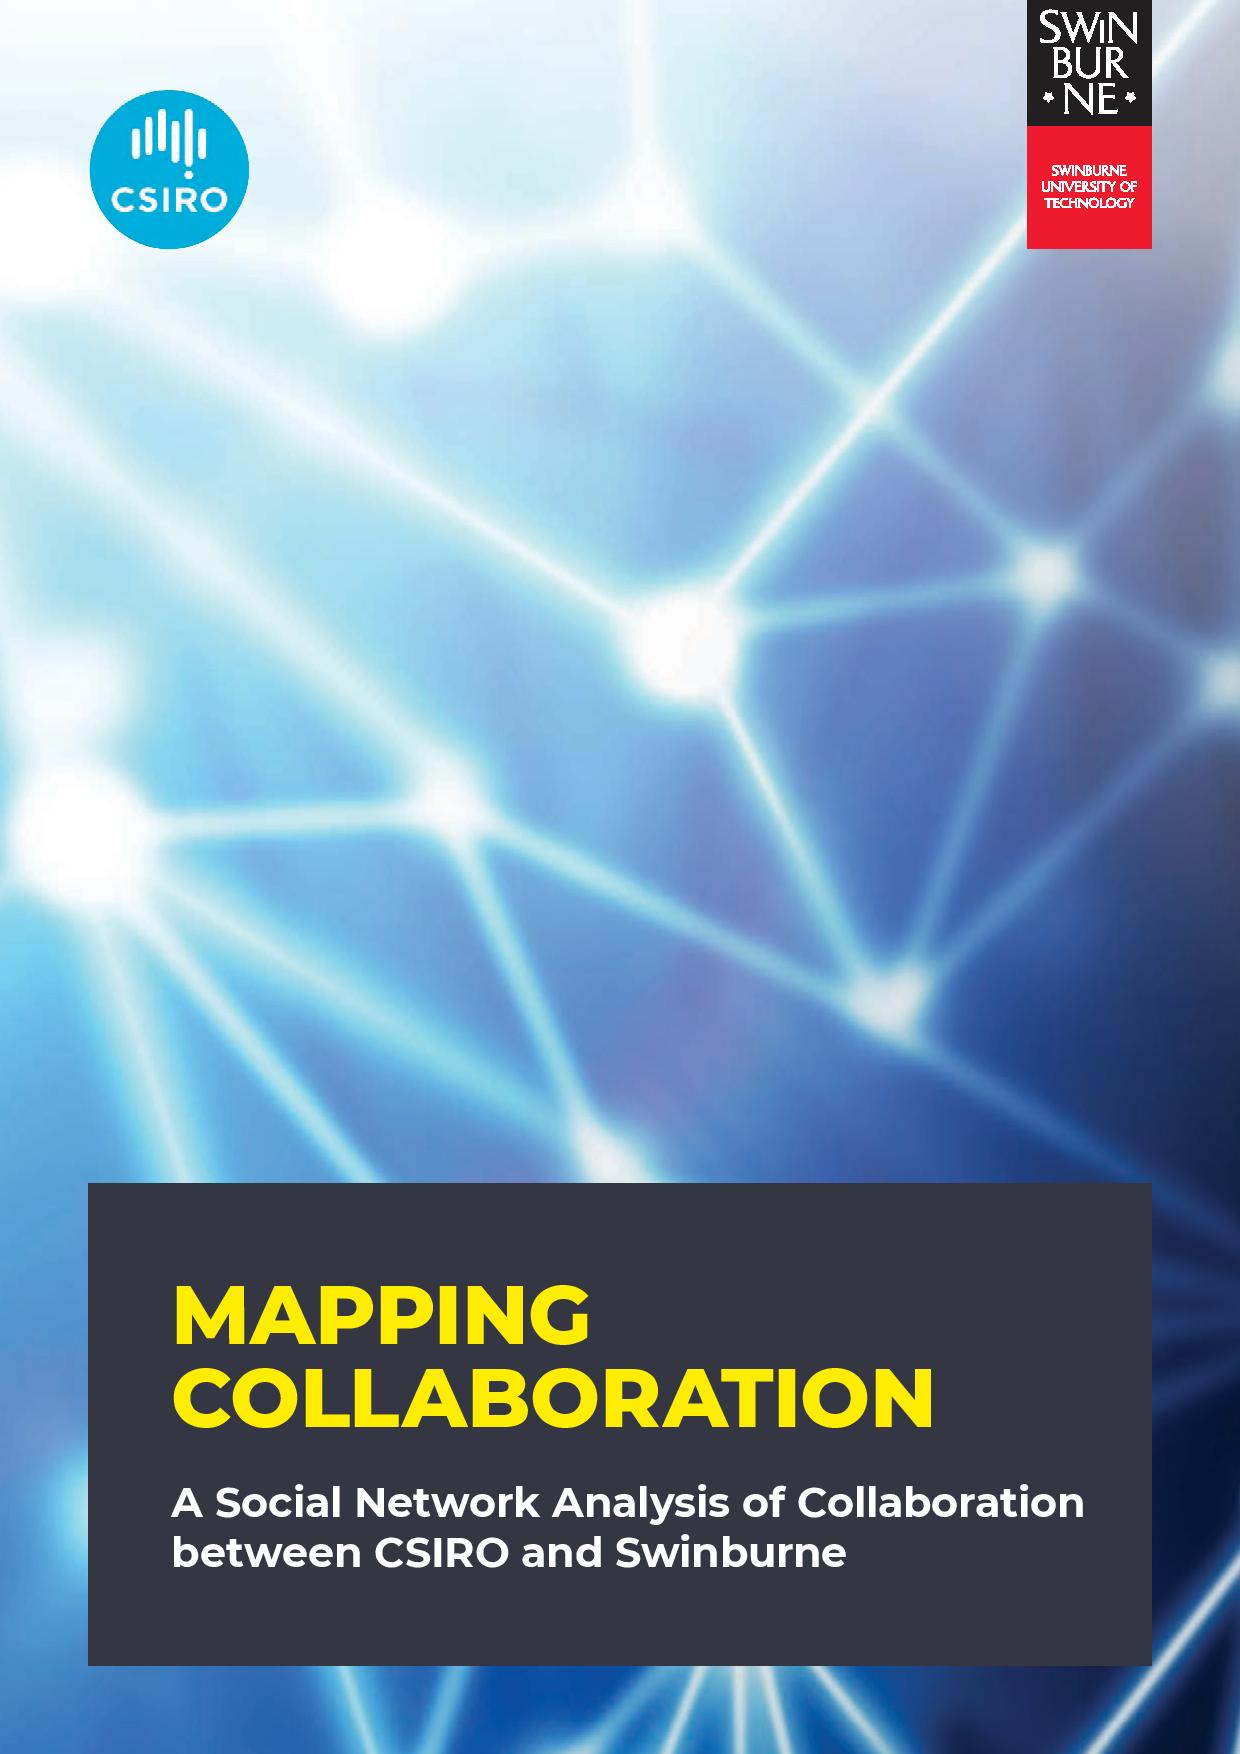 Mapping Collaboration: A Social Network Analysis of Collaboration between CSIRO and Swinburne